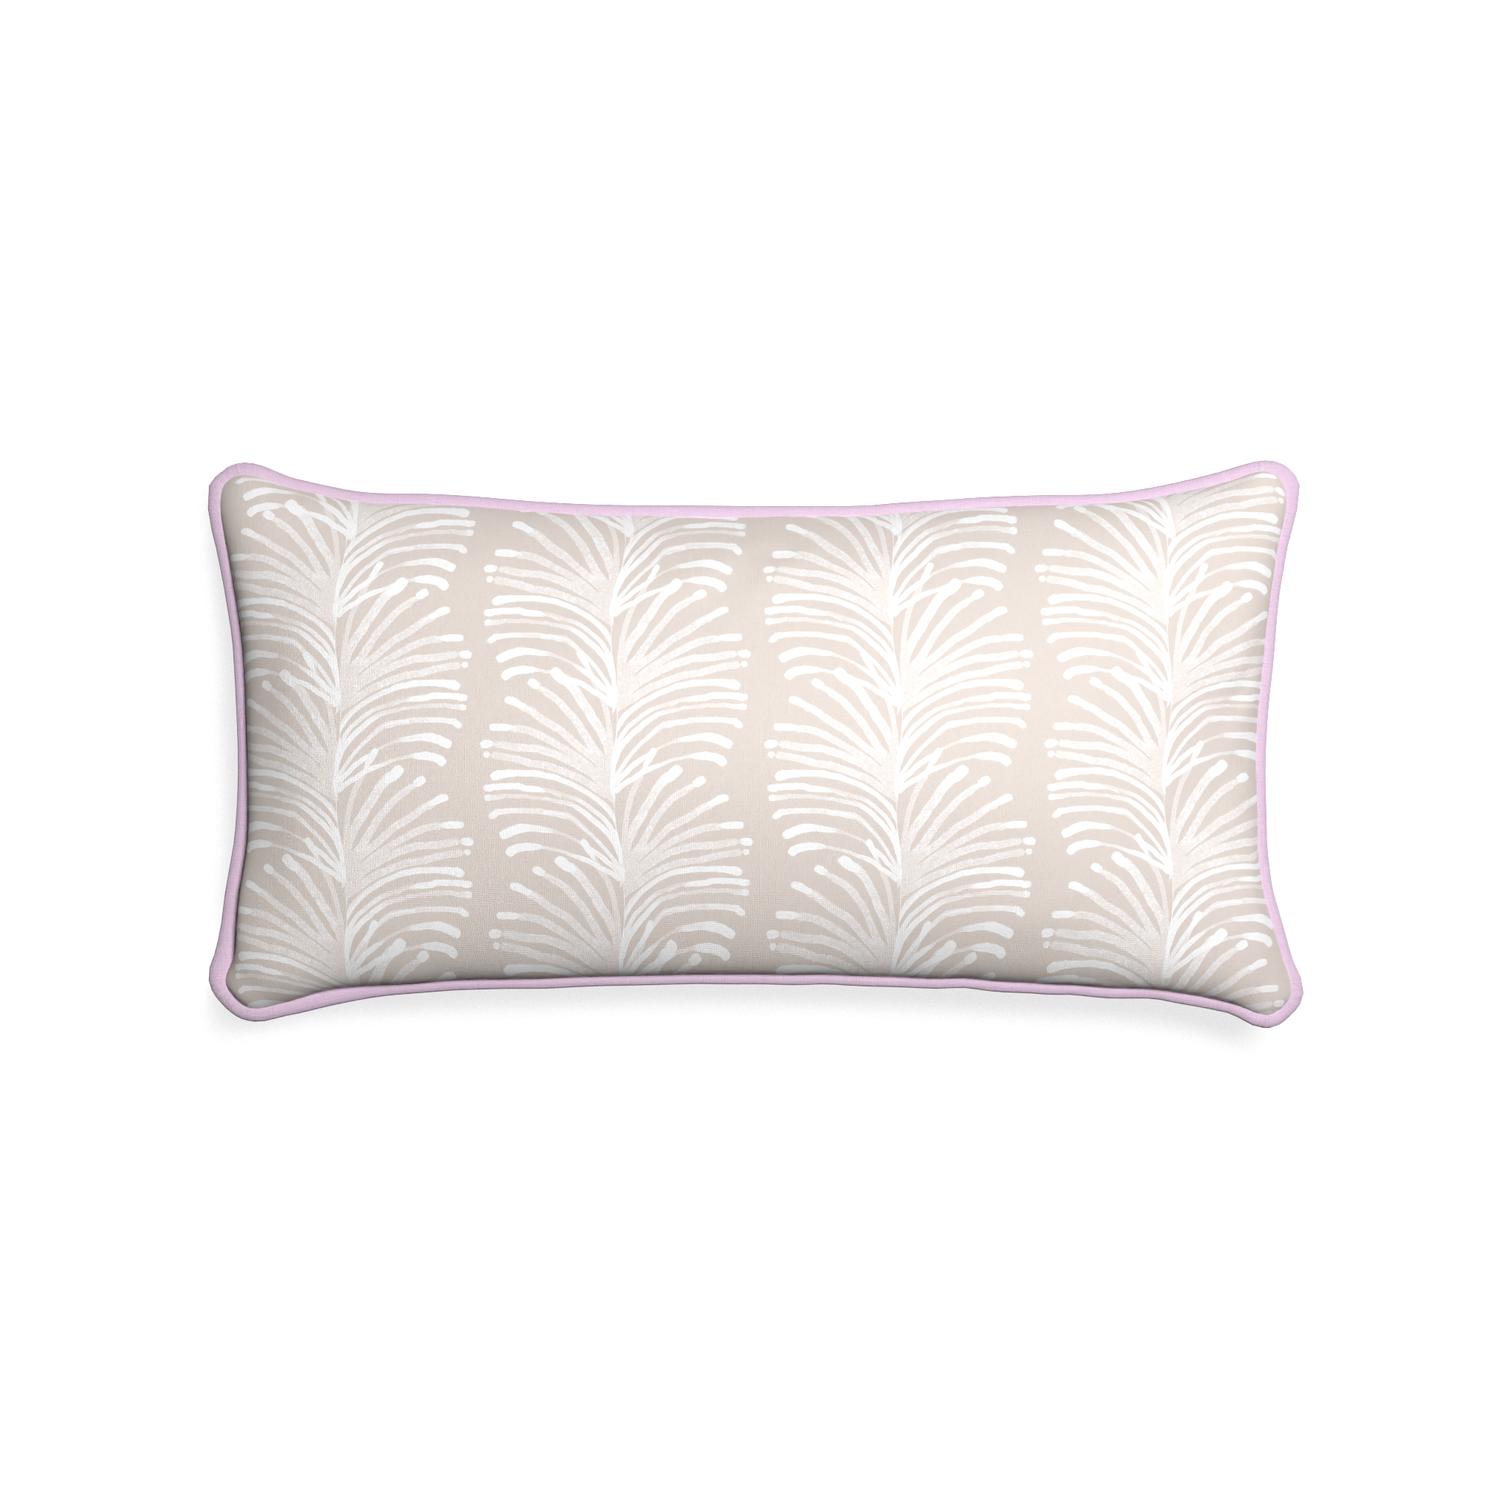 Midi-lumbar emma sand custom sand colored botanical stripepillow with l piping on white background